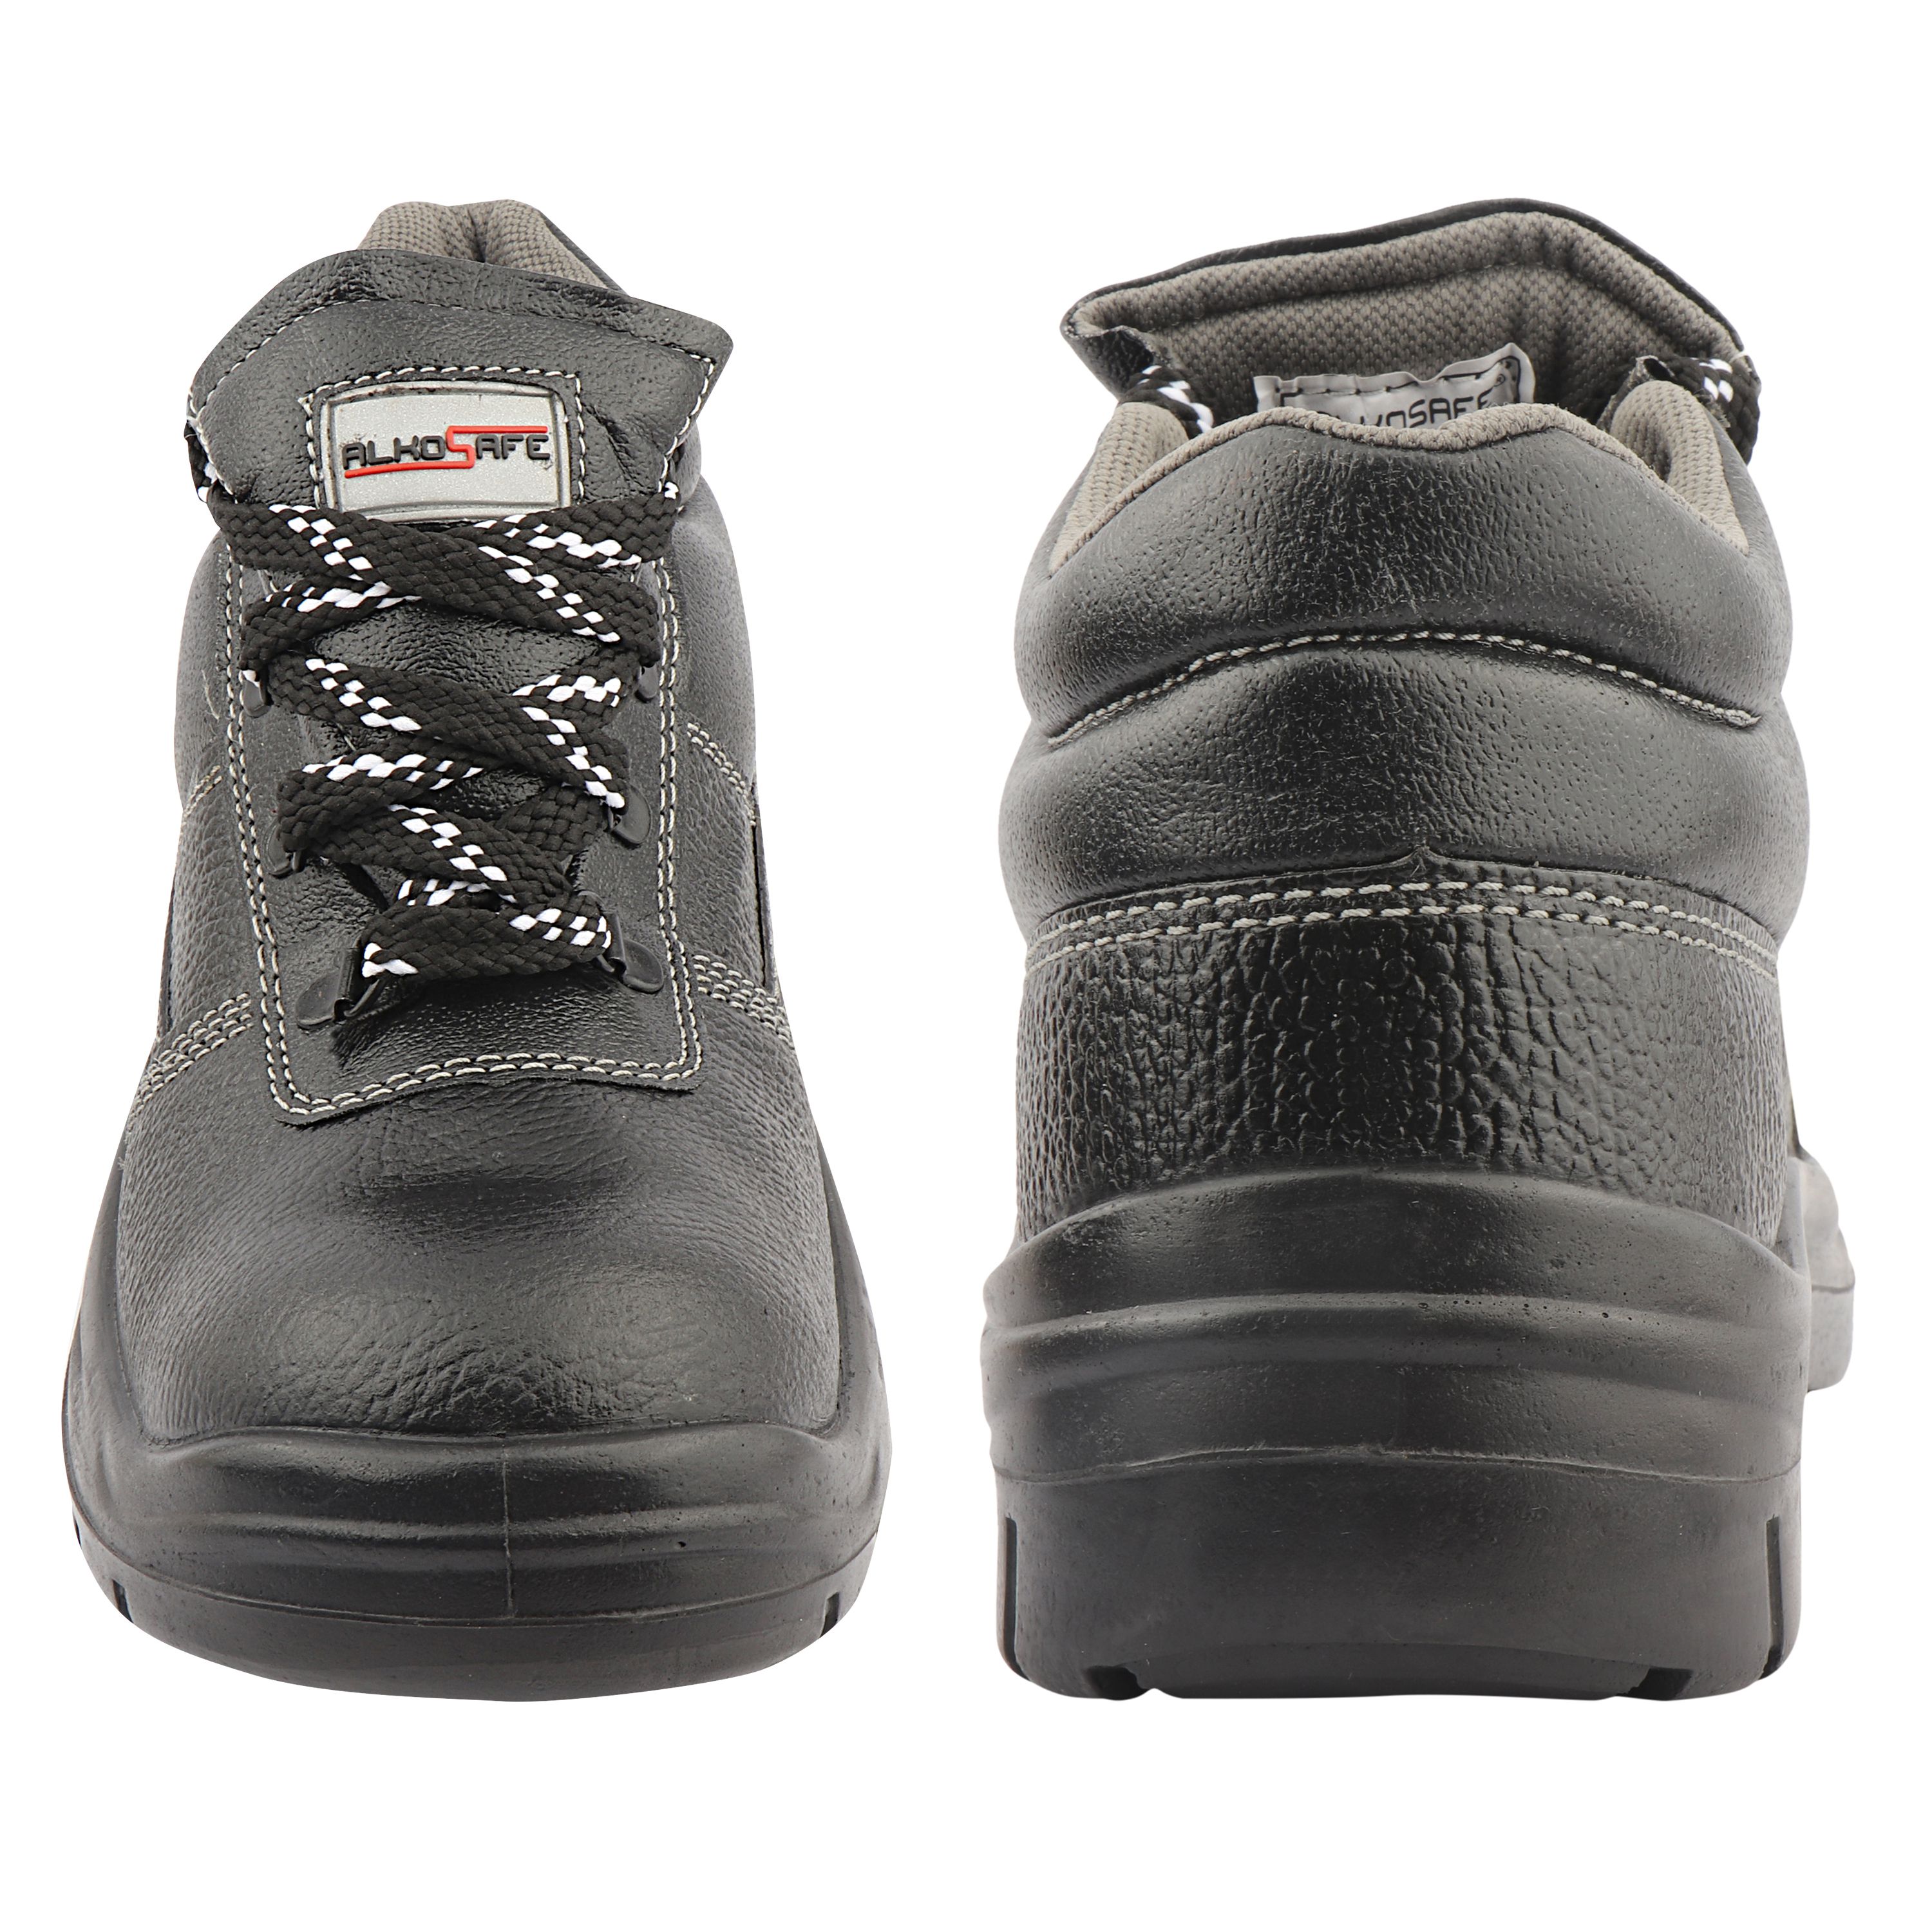 alkosafe safety shoes price